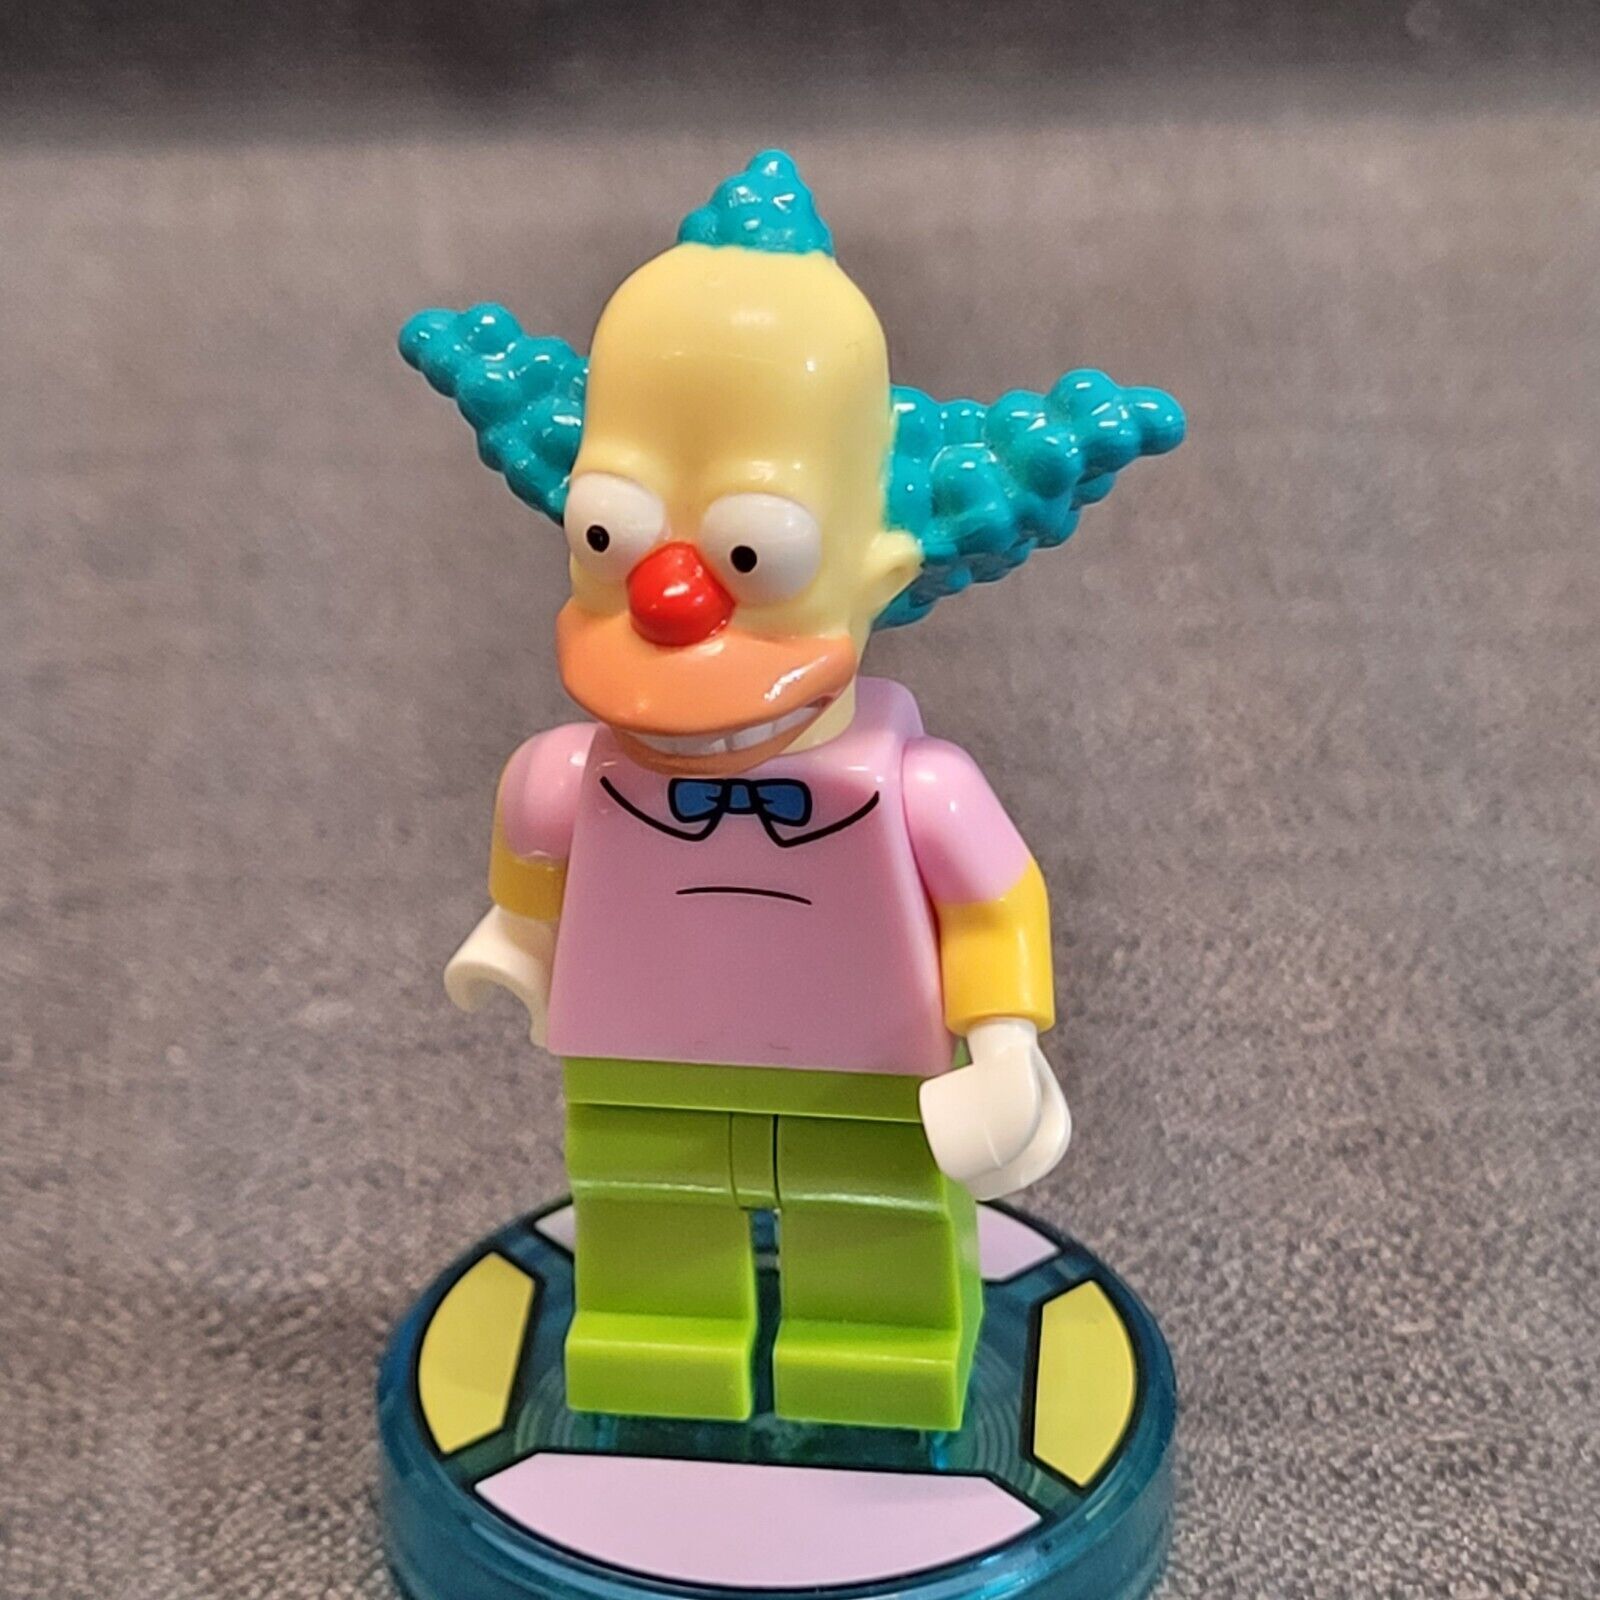 Primary image for Lego Dimensions Krusty the Clown Simpsons Figurine + Toy Tags